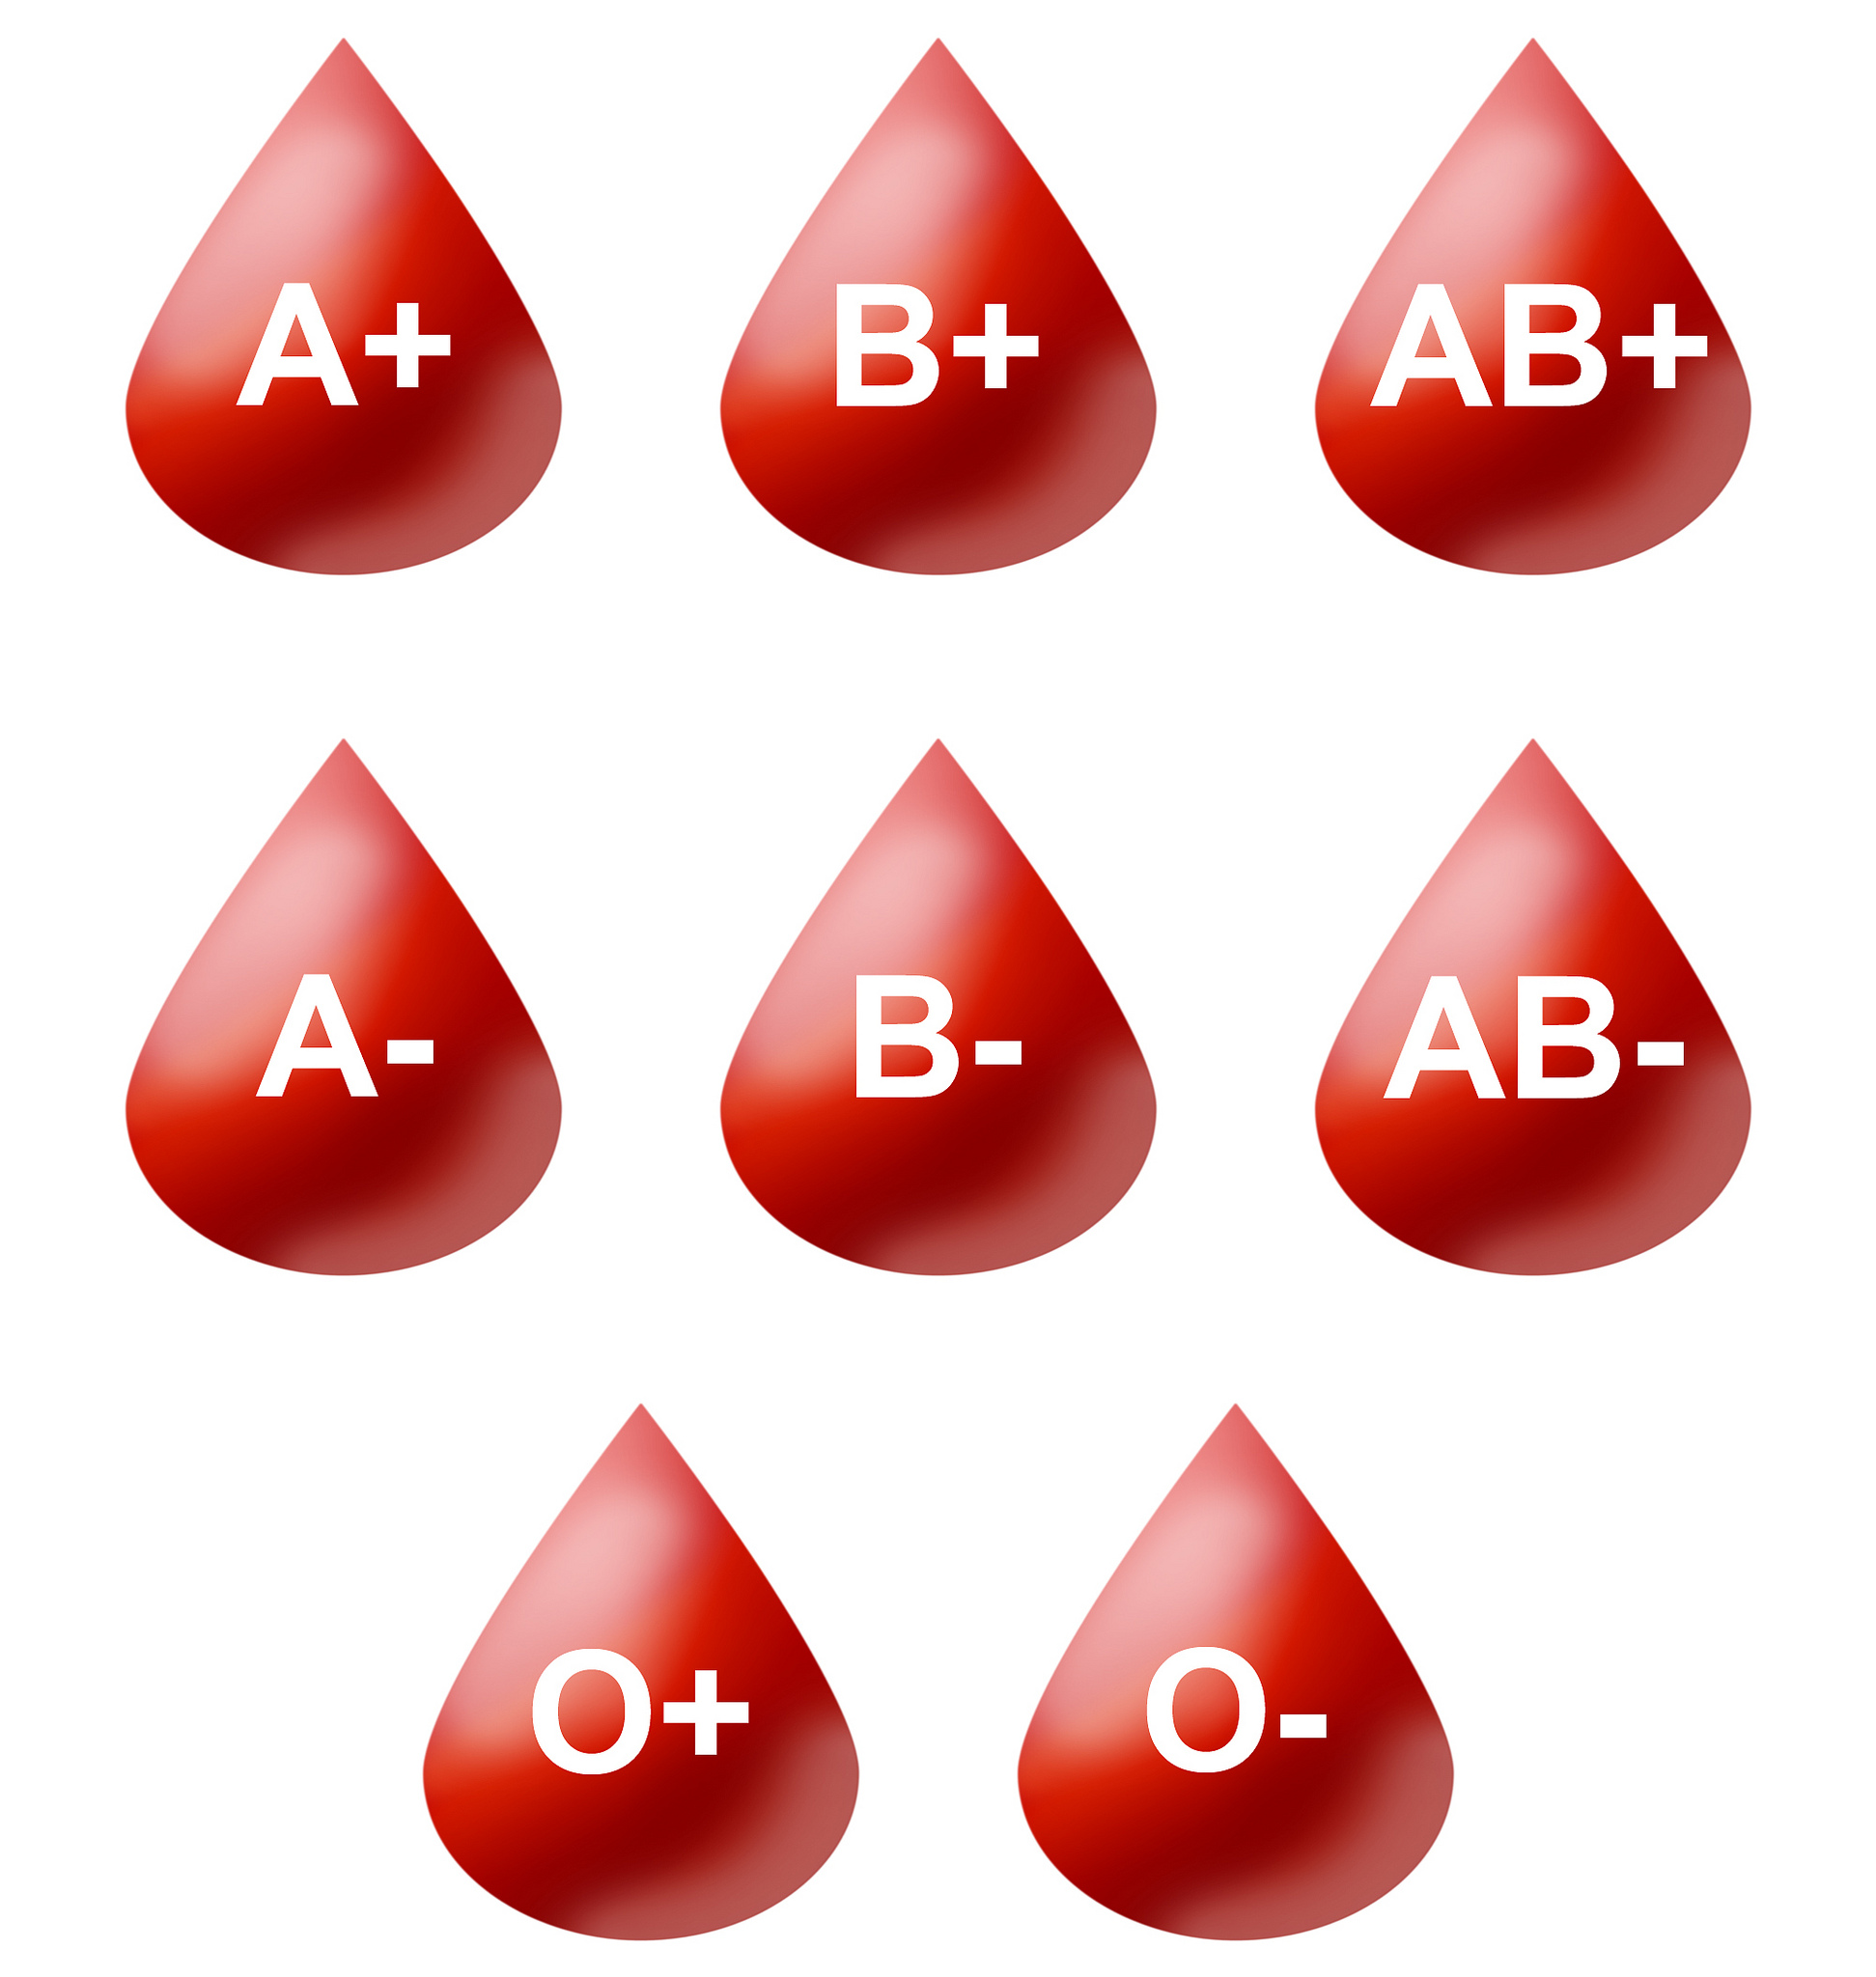 Does Your Blood Type Matter